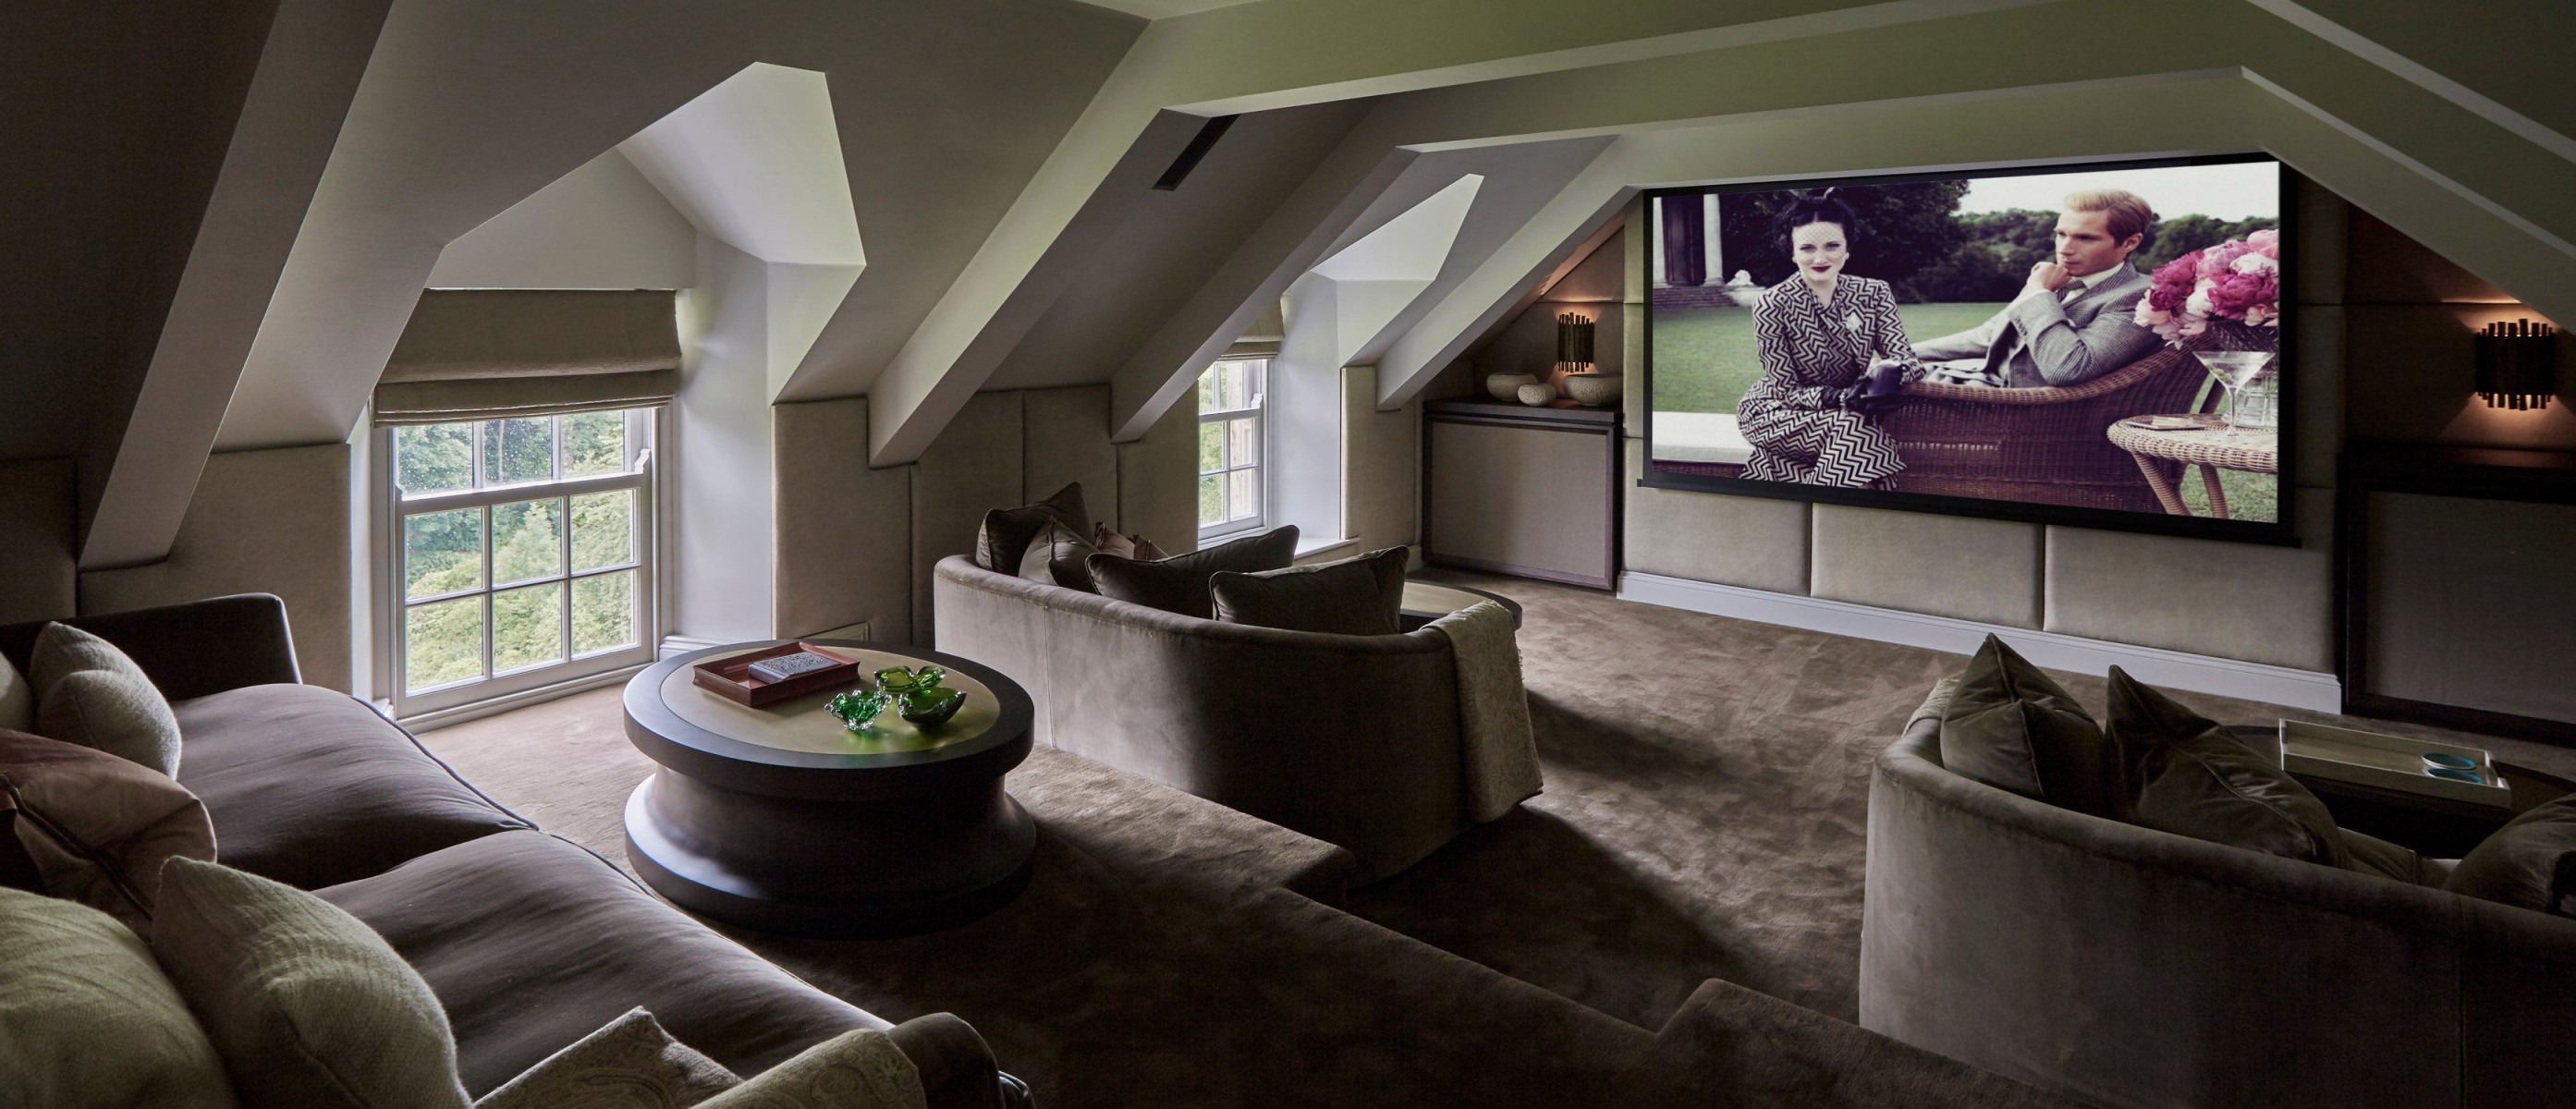 The cinema room is perfect for entertaining guests